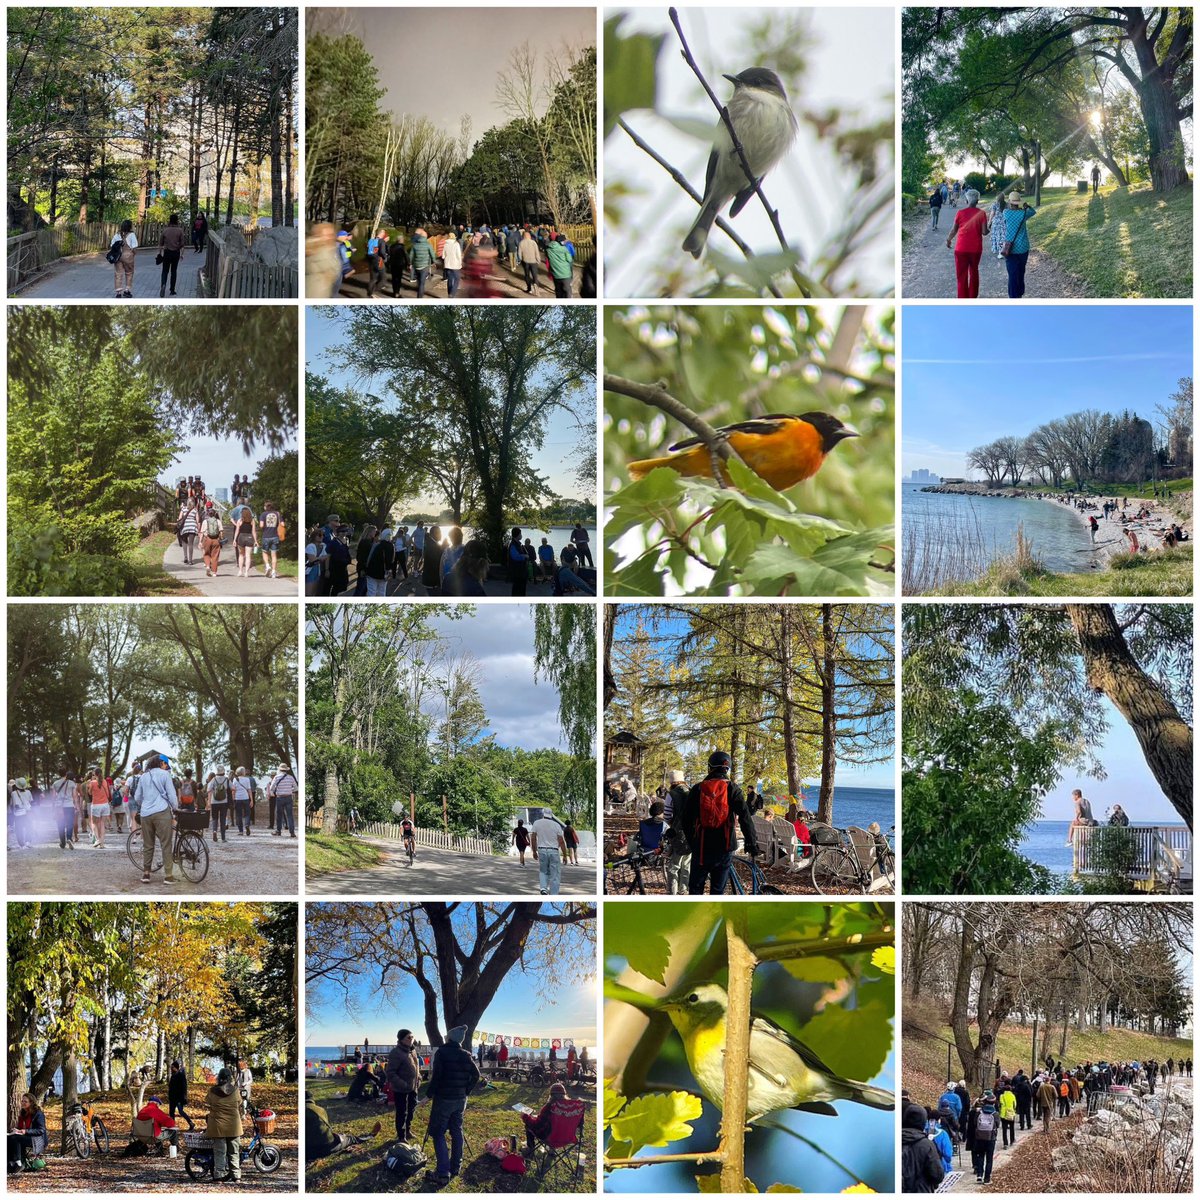 Recent images of people and animals around the West Island trees at #OntarioPlace, which will be cut down and replaced with @ThermeCanada’s paid admission room to watch other trees on video.